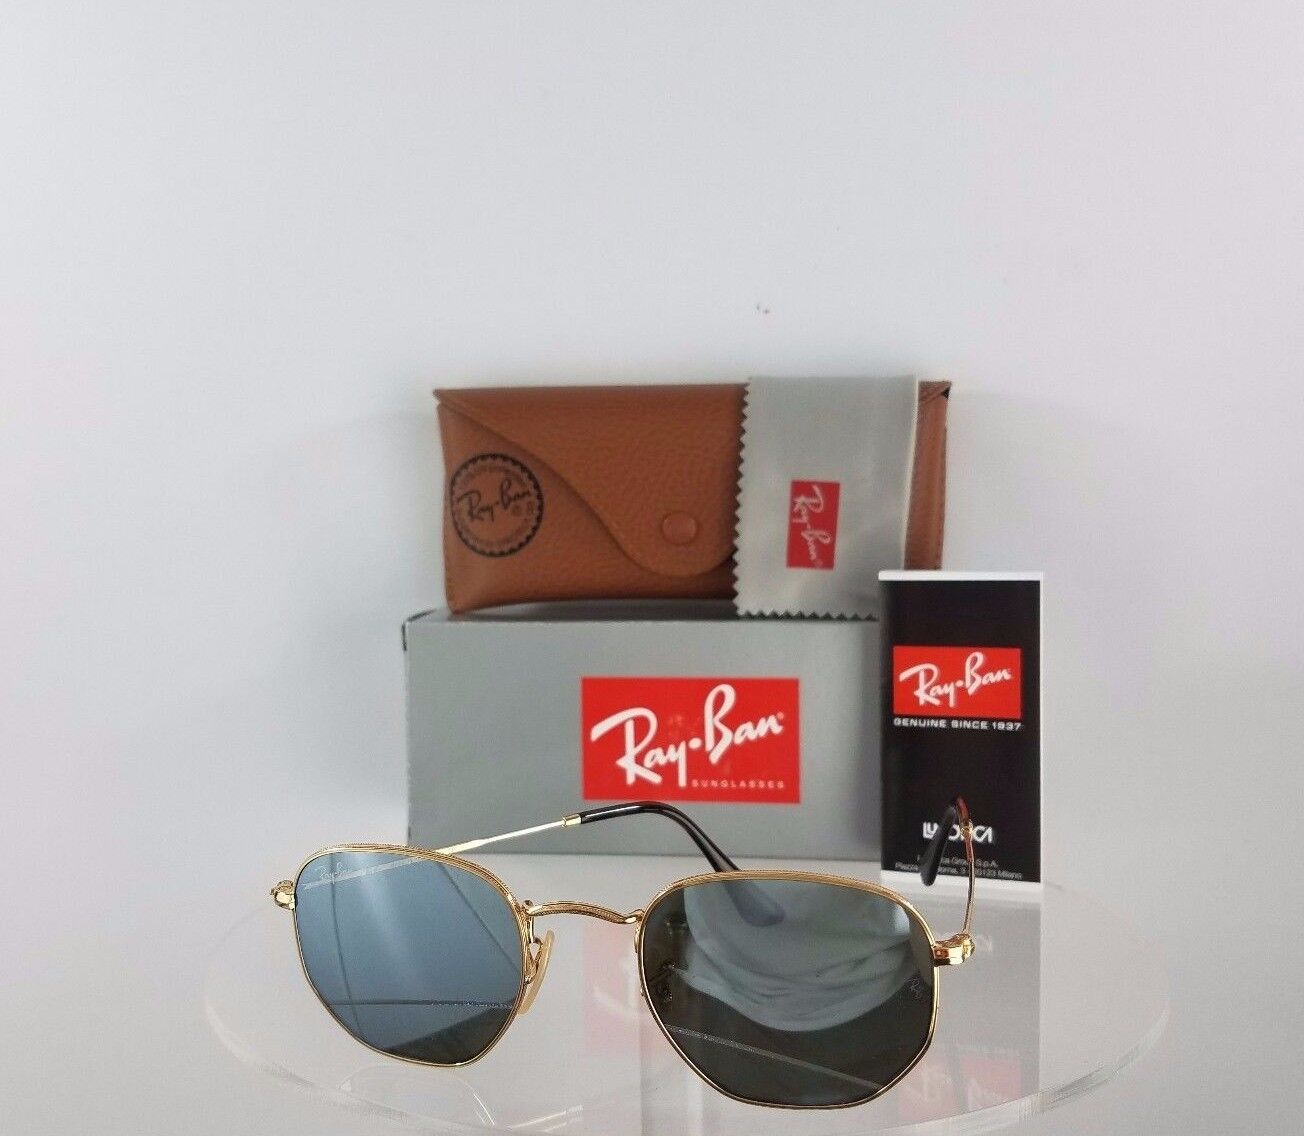 Ray Ban RB 3548 001 30 Gold Sunglasses